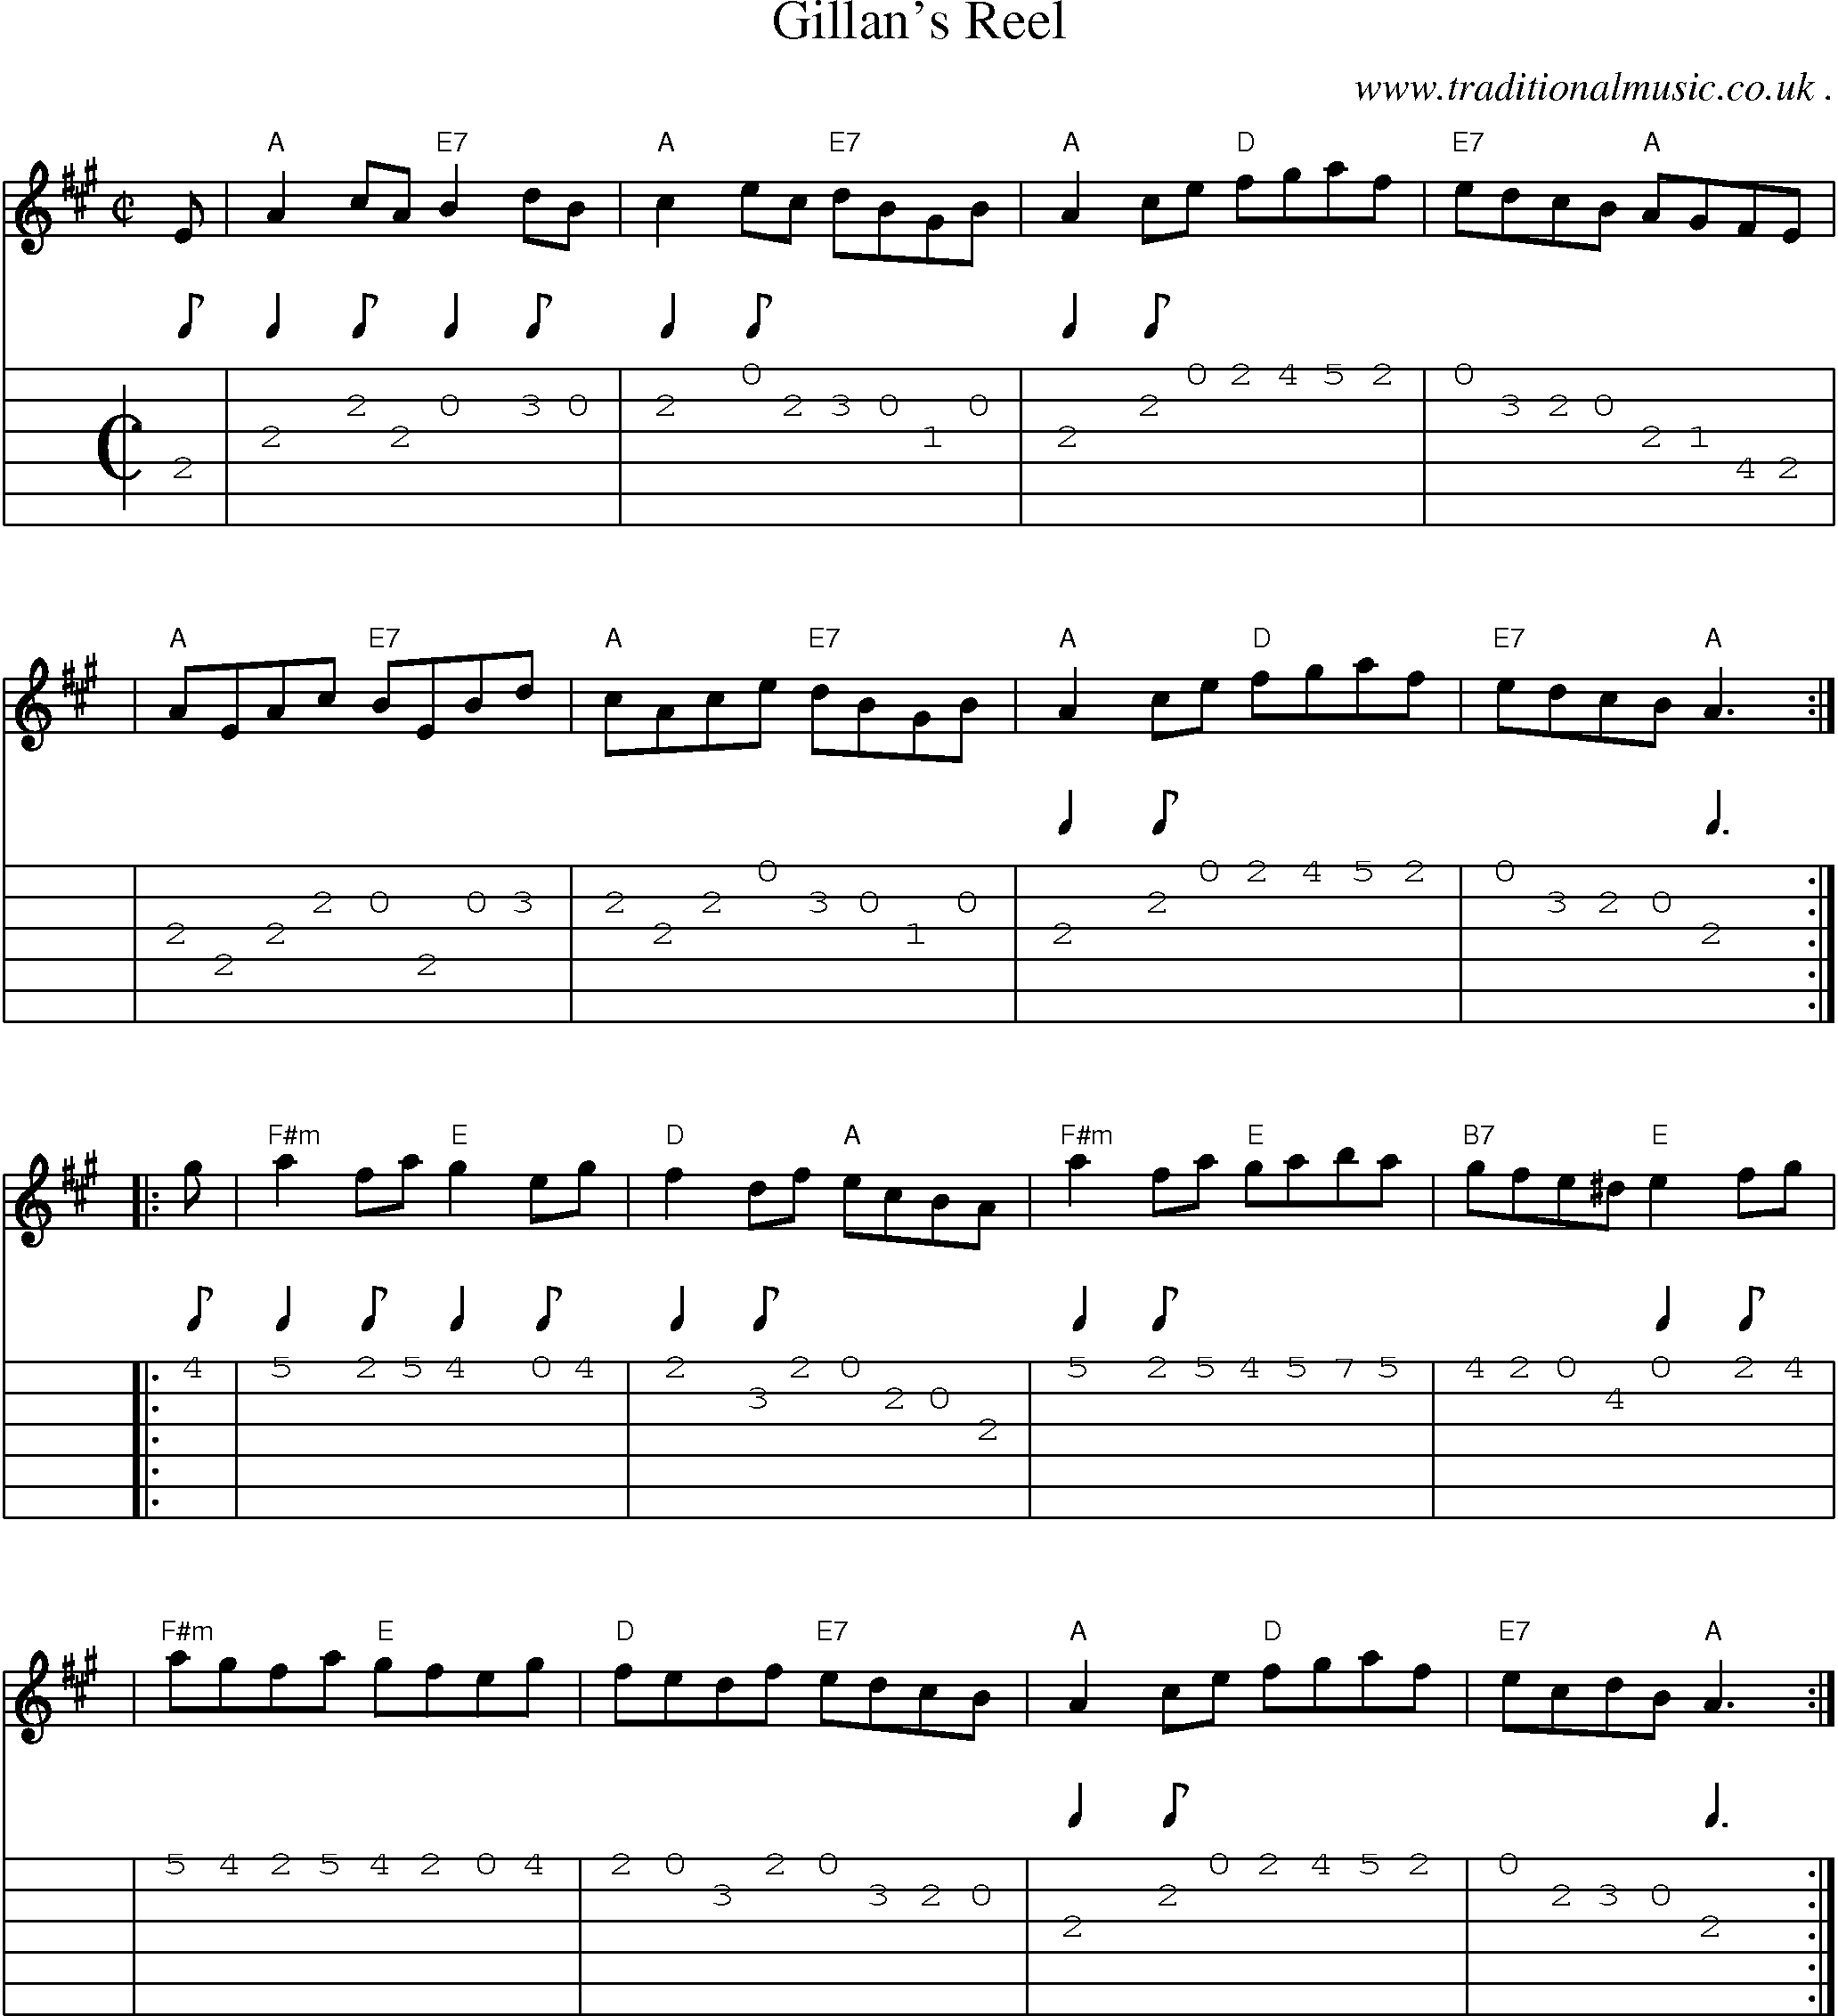 Sheet-music  score, Chords and Guitar Tabs for Gillans Reel